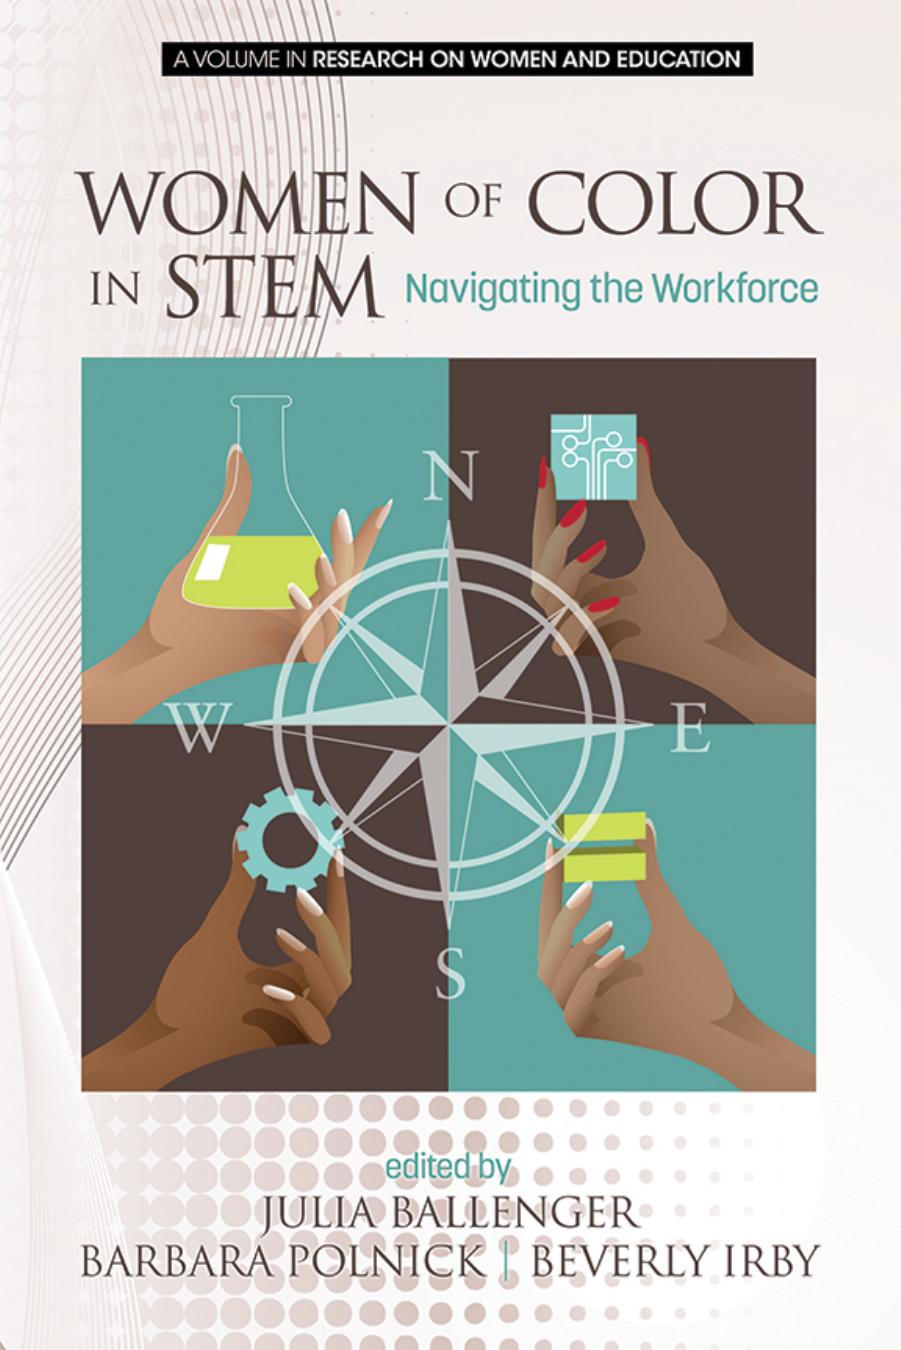 Women of Color in STEM : Navigating the Workforce by Julia Ballenger; Barbara Polnick; Beverly Irby